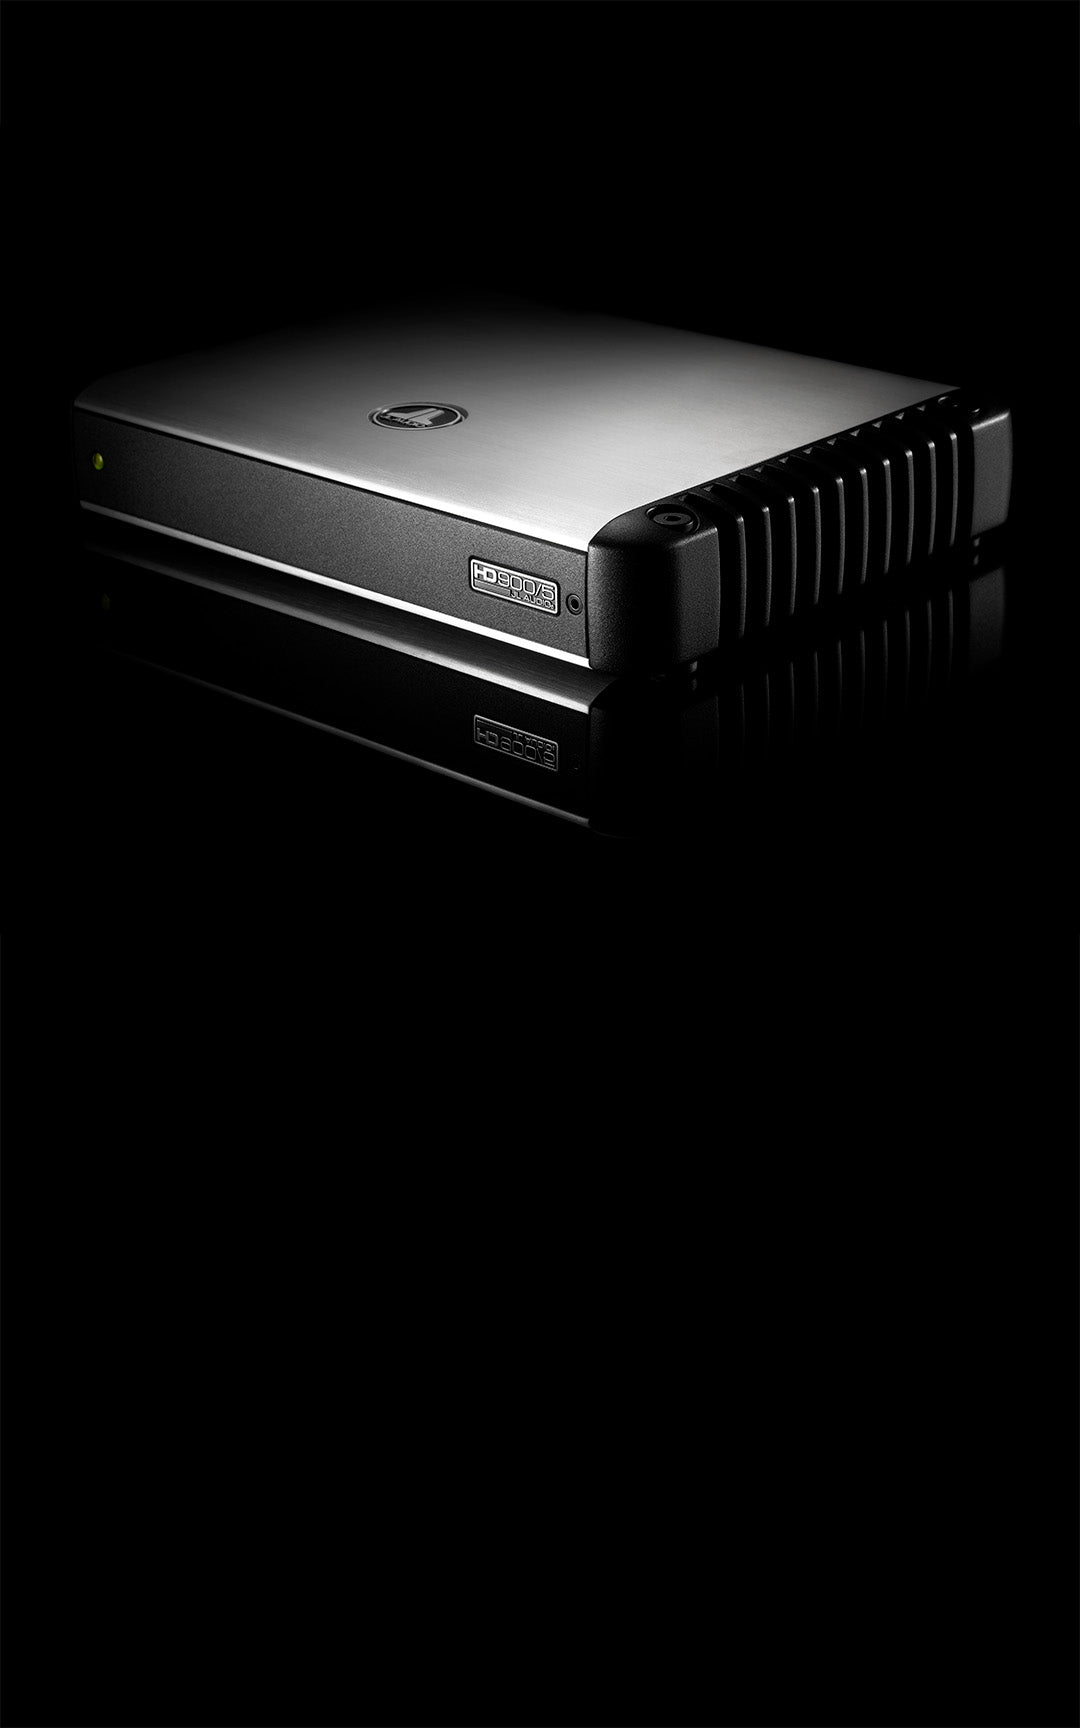 An angled view of an HD900 amplifier in a dark sleek setting.